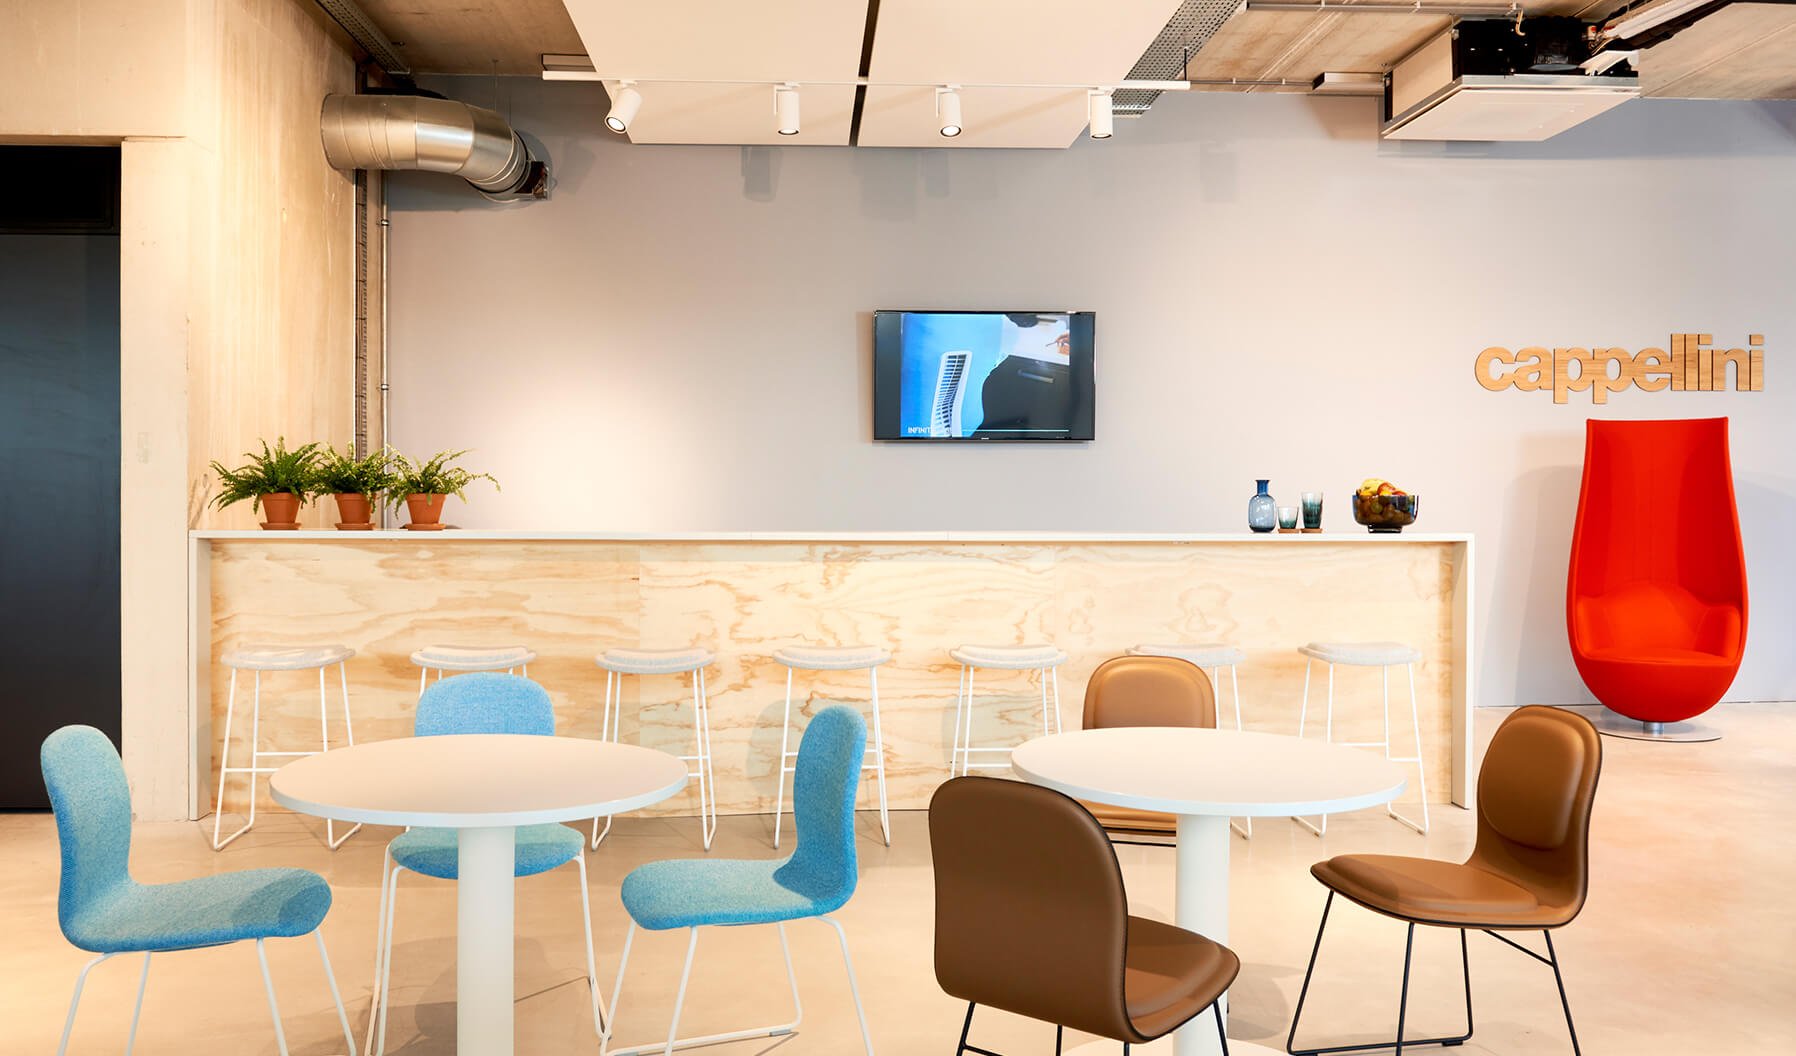 The Cappellini café provides a stylish, informal atmosphere to relax over lunch or escape the work environment for a chat. Framery offers a booth for focus work or a private conversation.